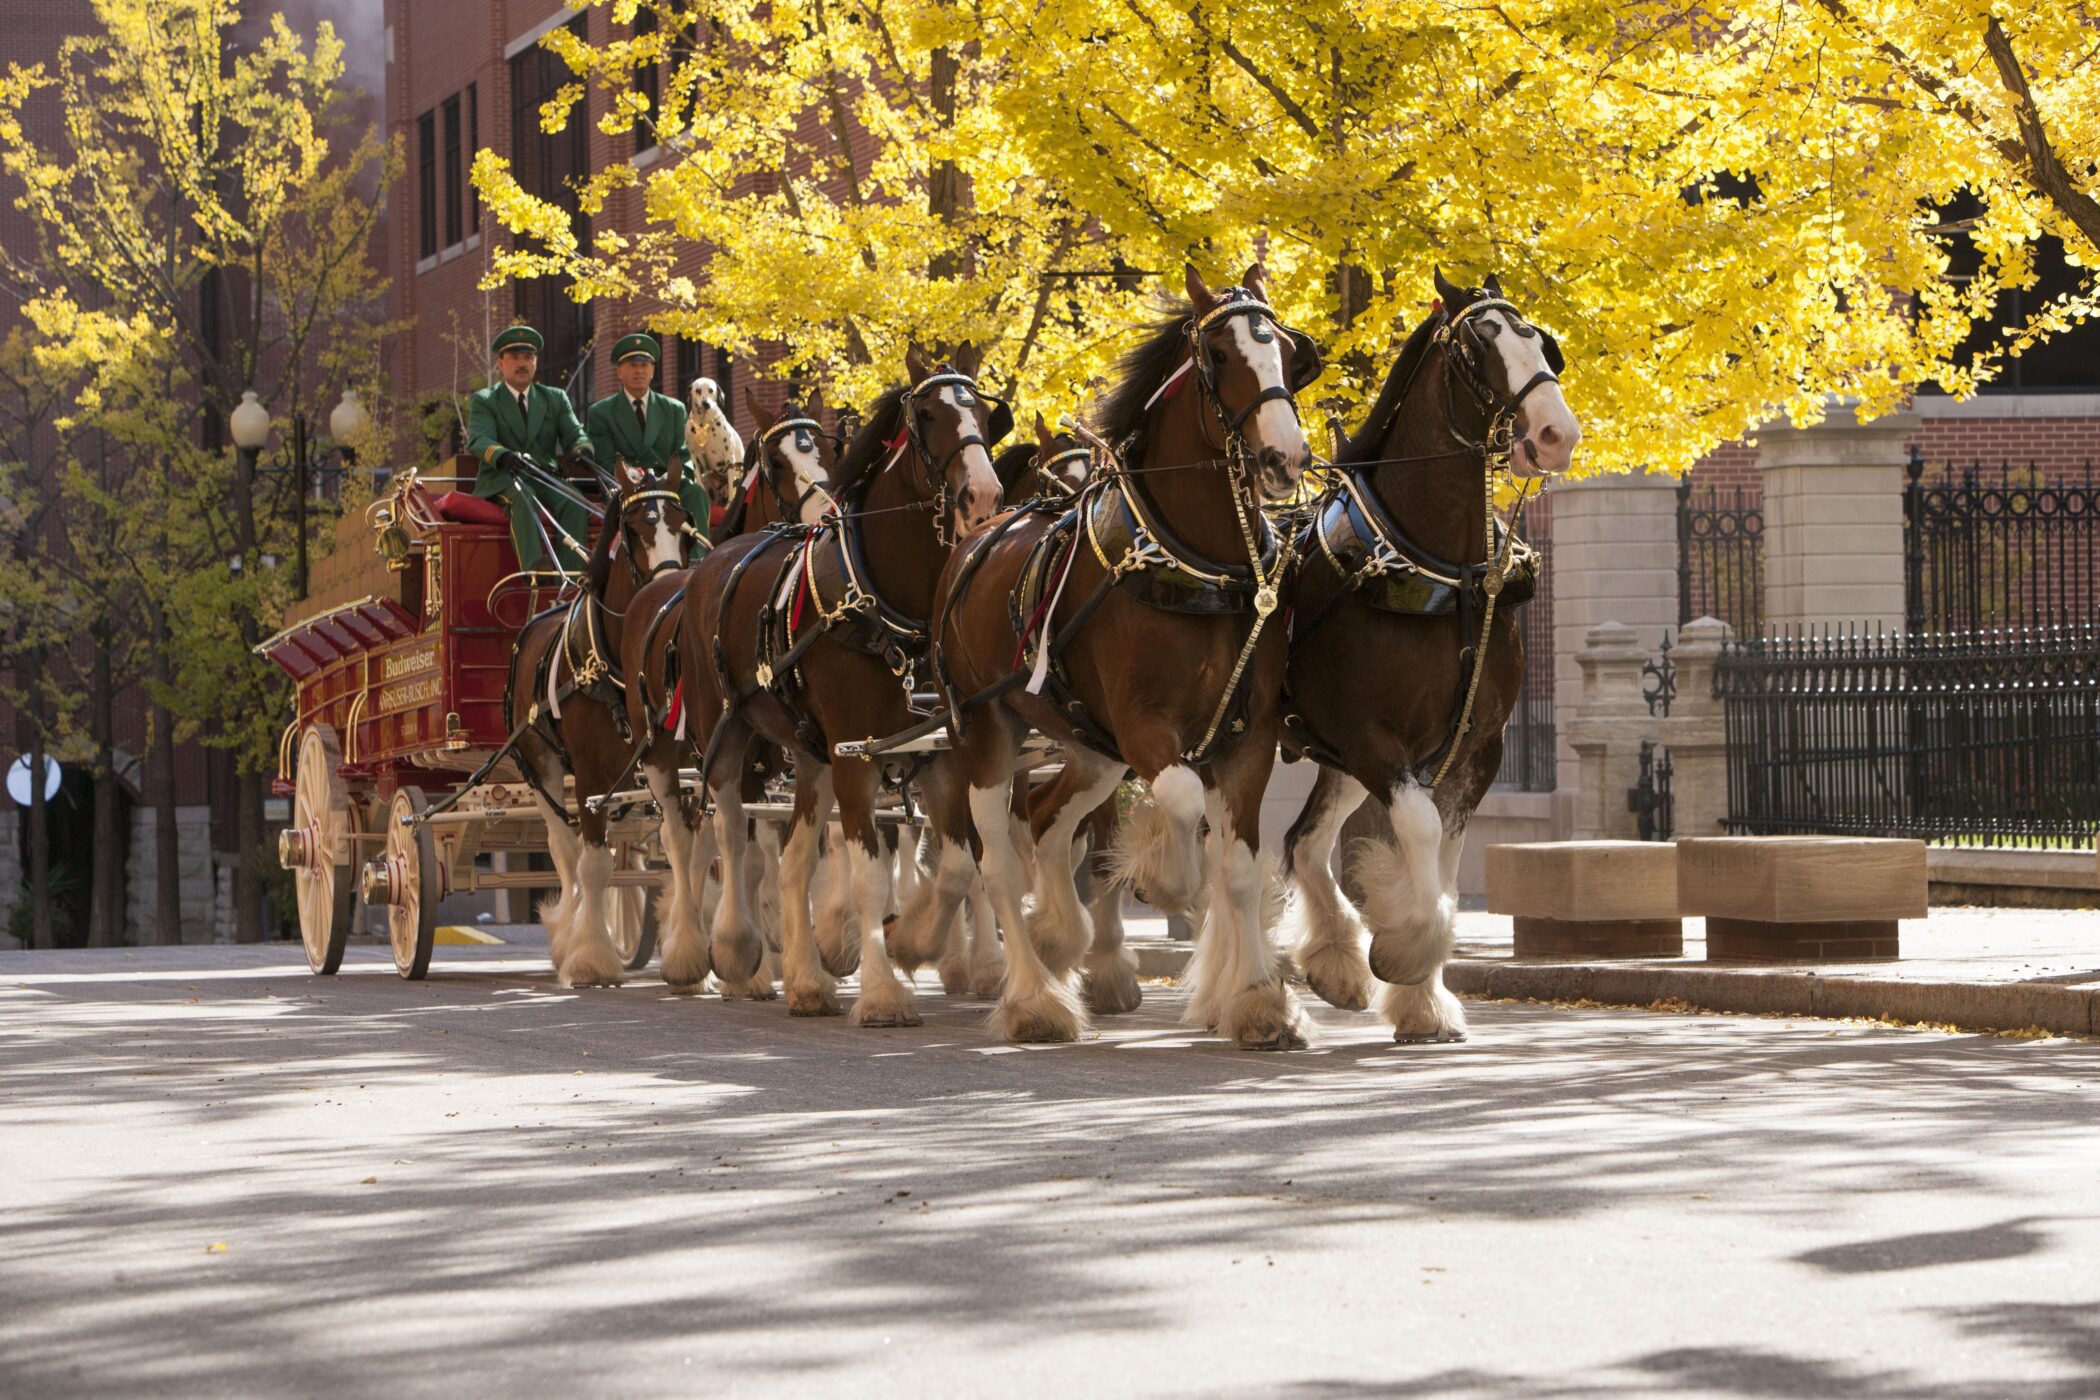 Budweiser Clydesdales At Harry Caray’s Tavern At Navy Pier Cropped